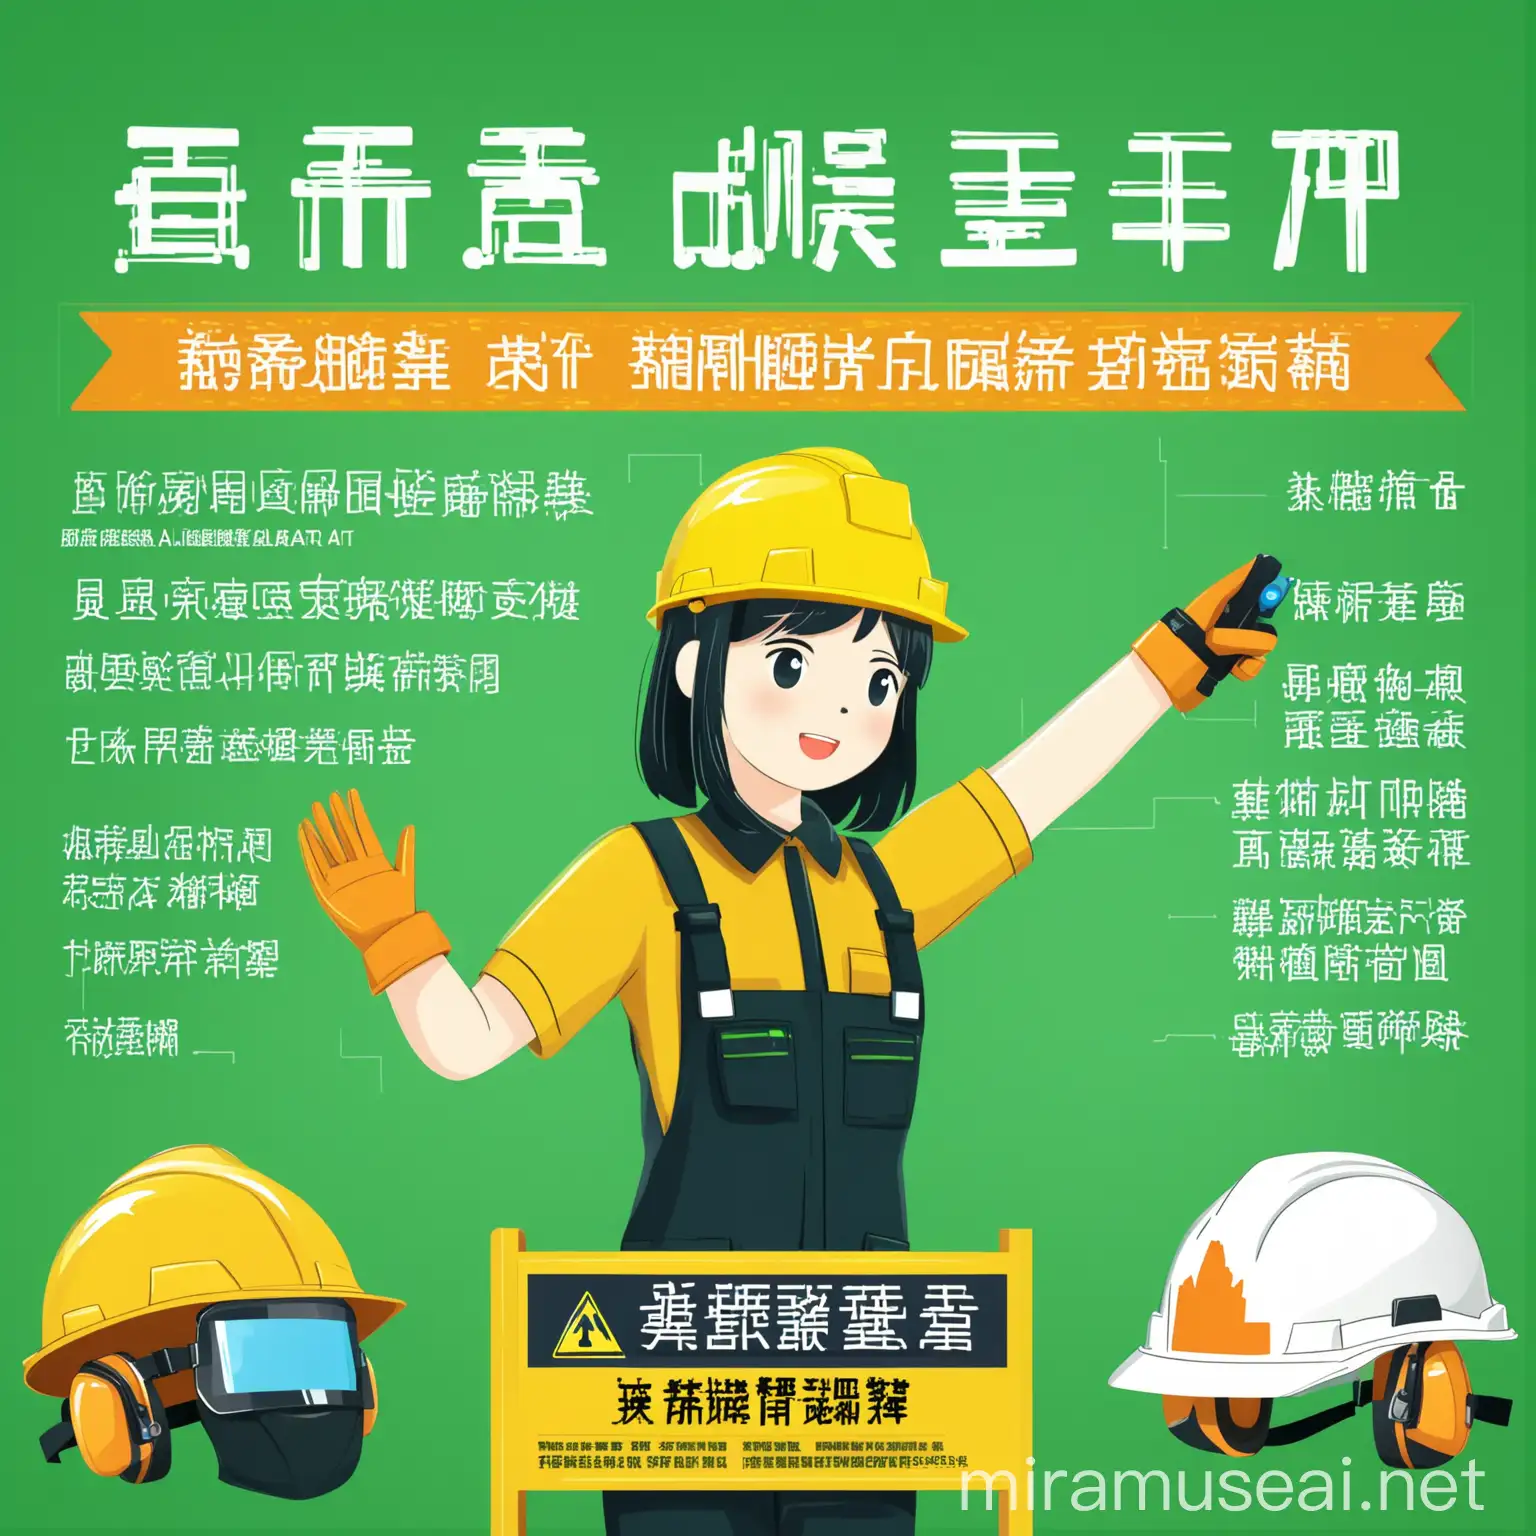 Green AI Safety Poster with Hard Hats for Safe Production Month